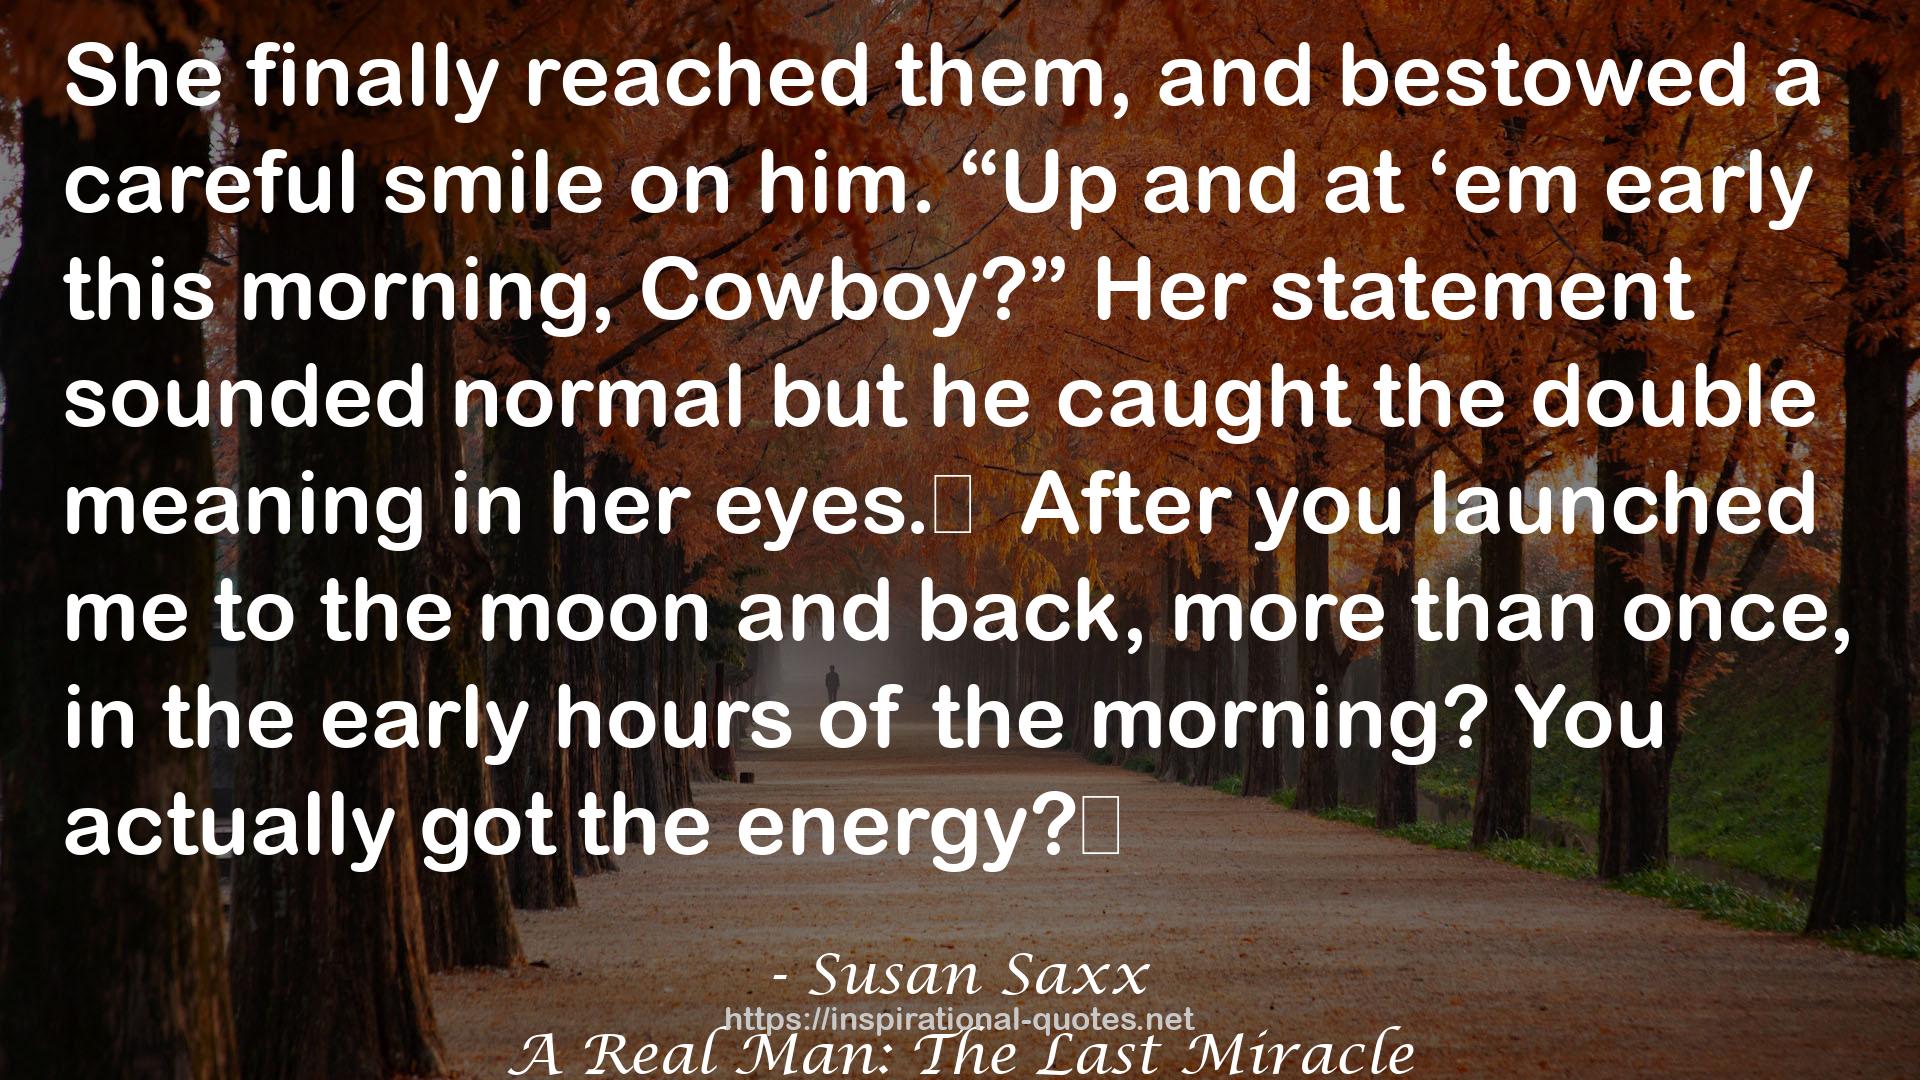 A Real Man: The Last Miracle QUOTES